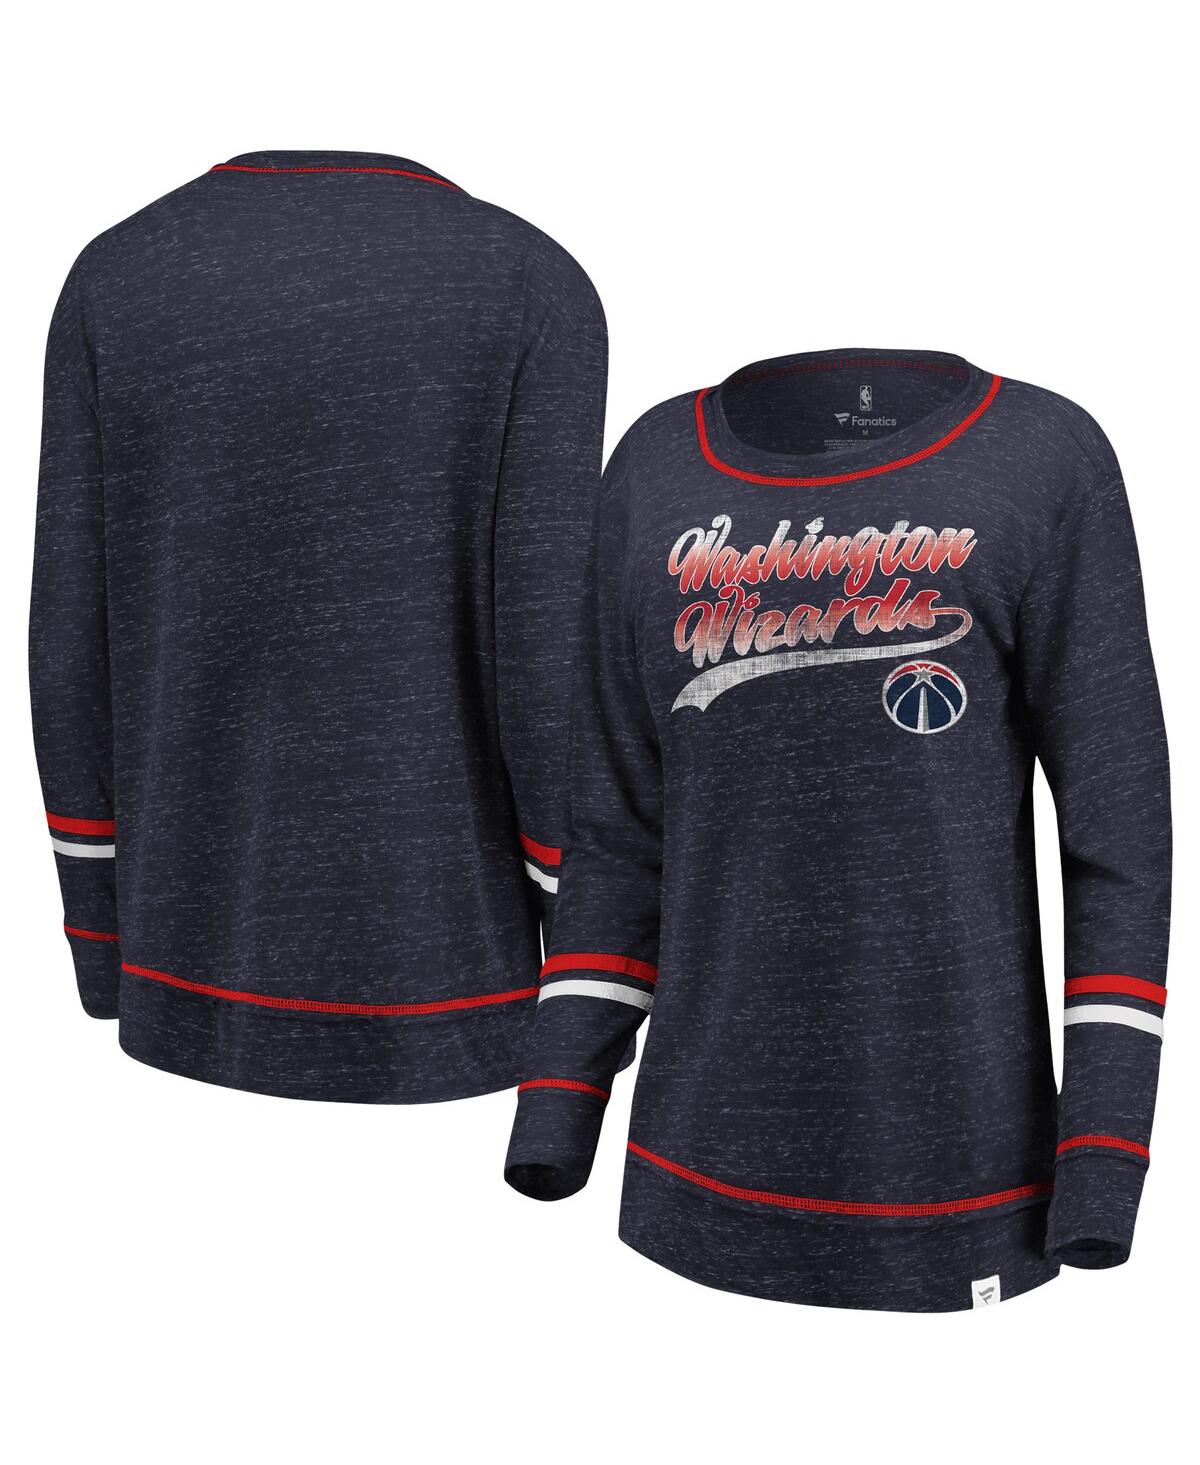 Shop Fanatics Women's  Navy And Red Washington Wizards Dreams Sleeve Stripe Speckle Long Sleeve T-shirt In Navy,red